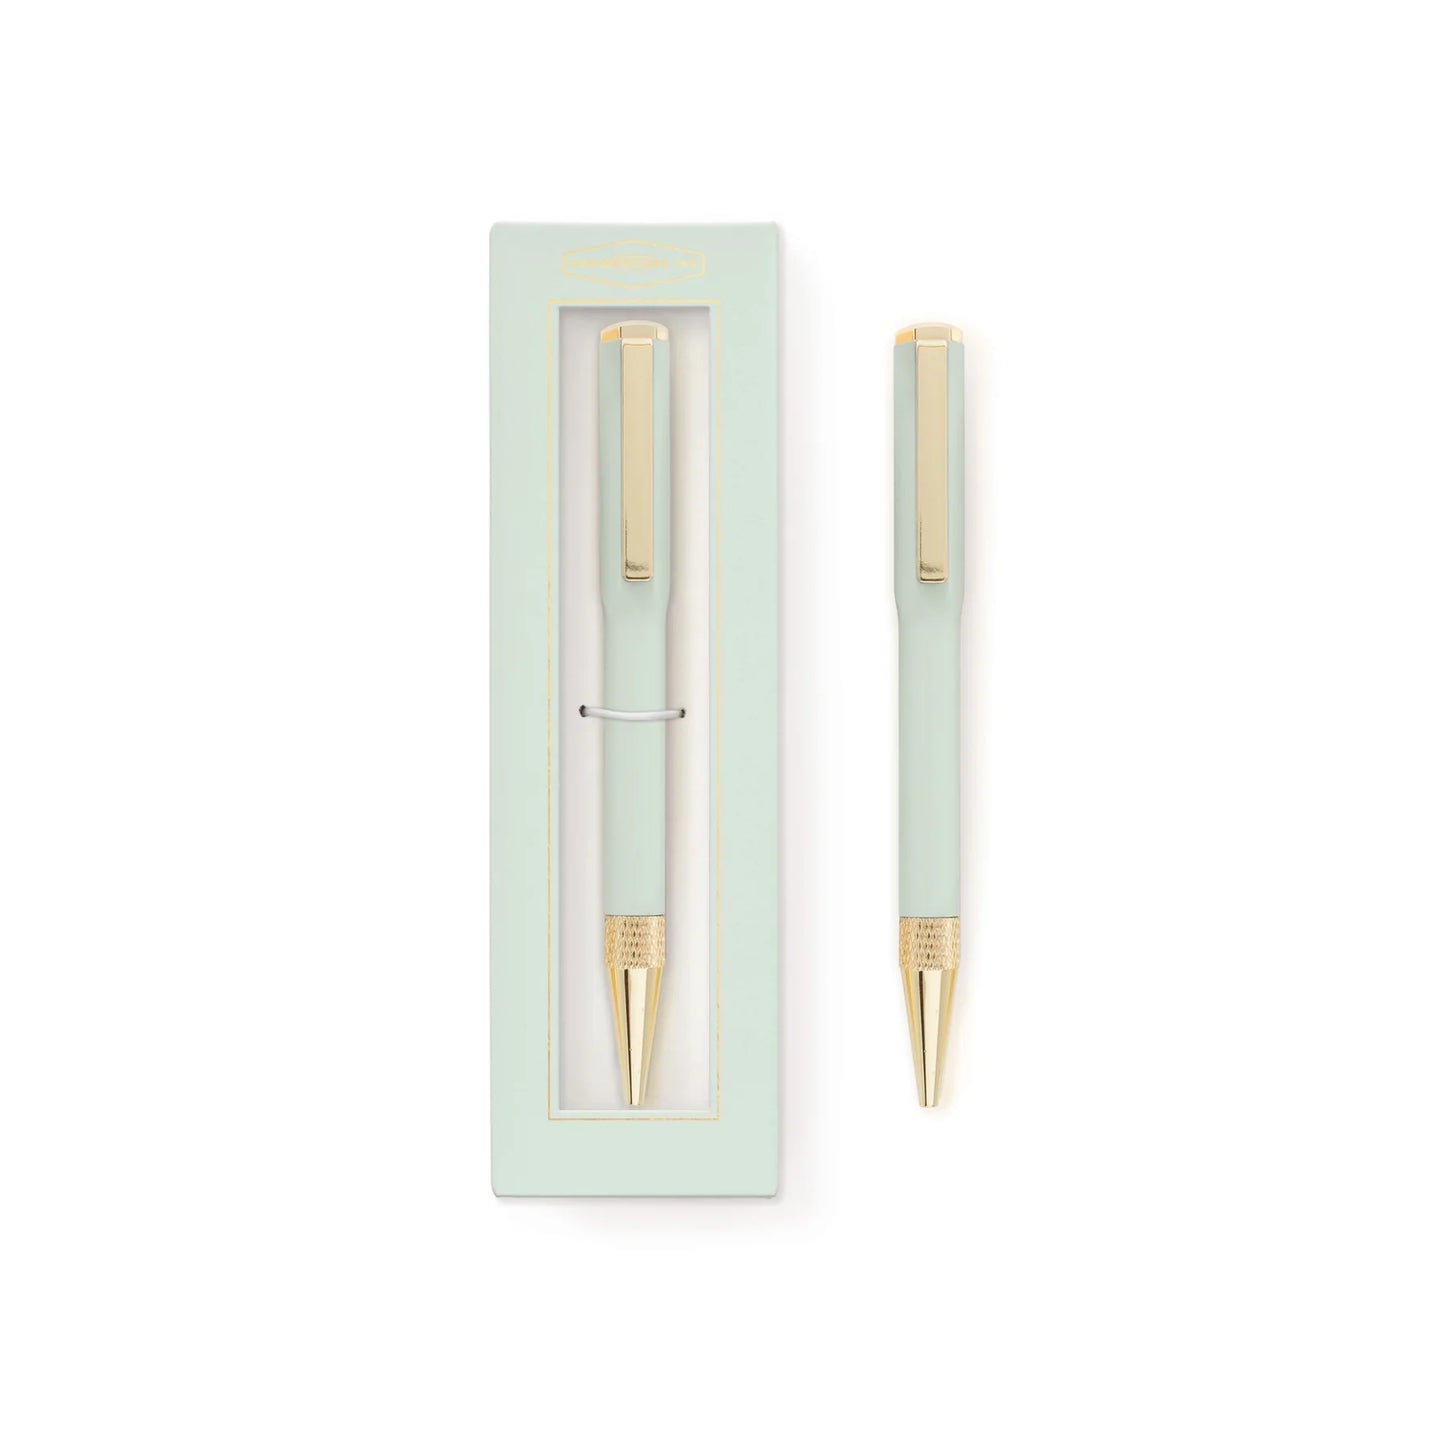 Mint block colour boxed pen from the Pencil Me In stationery shop.